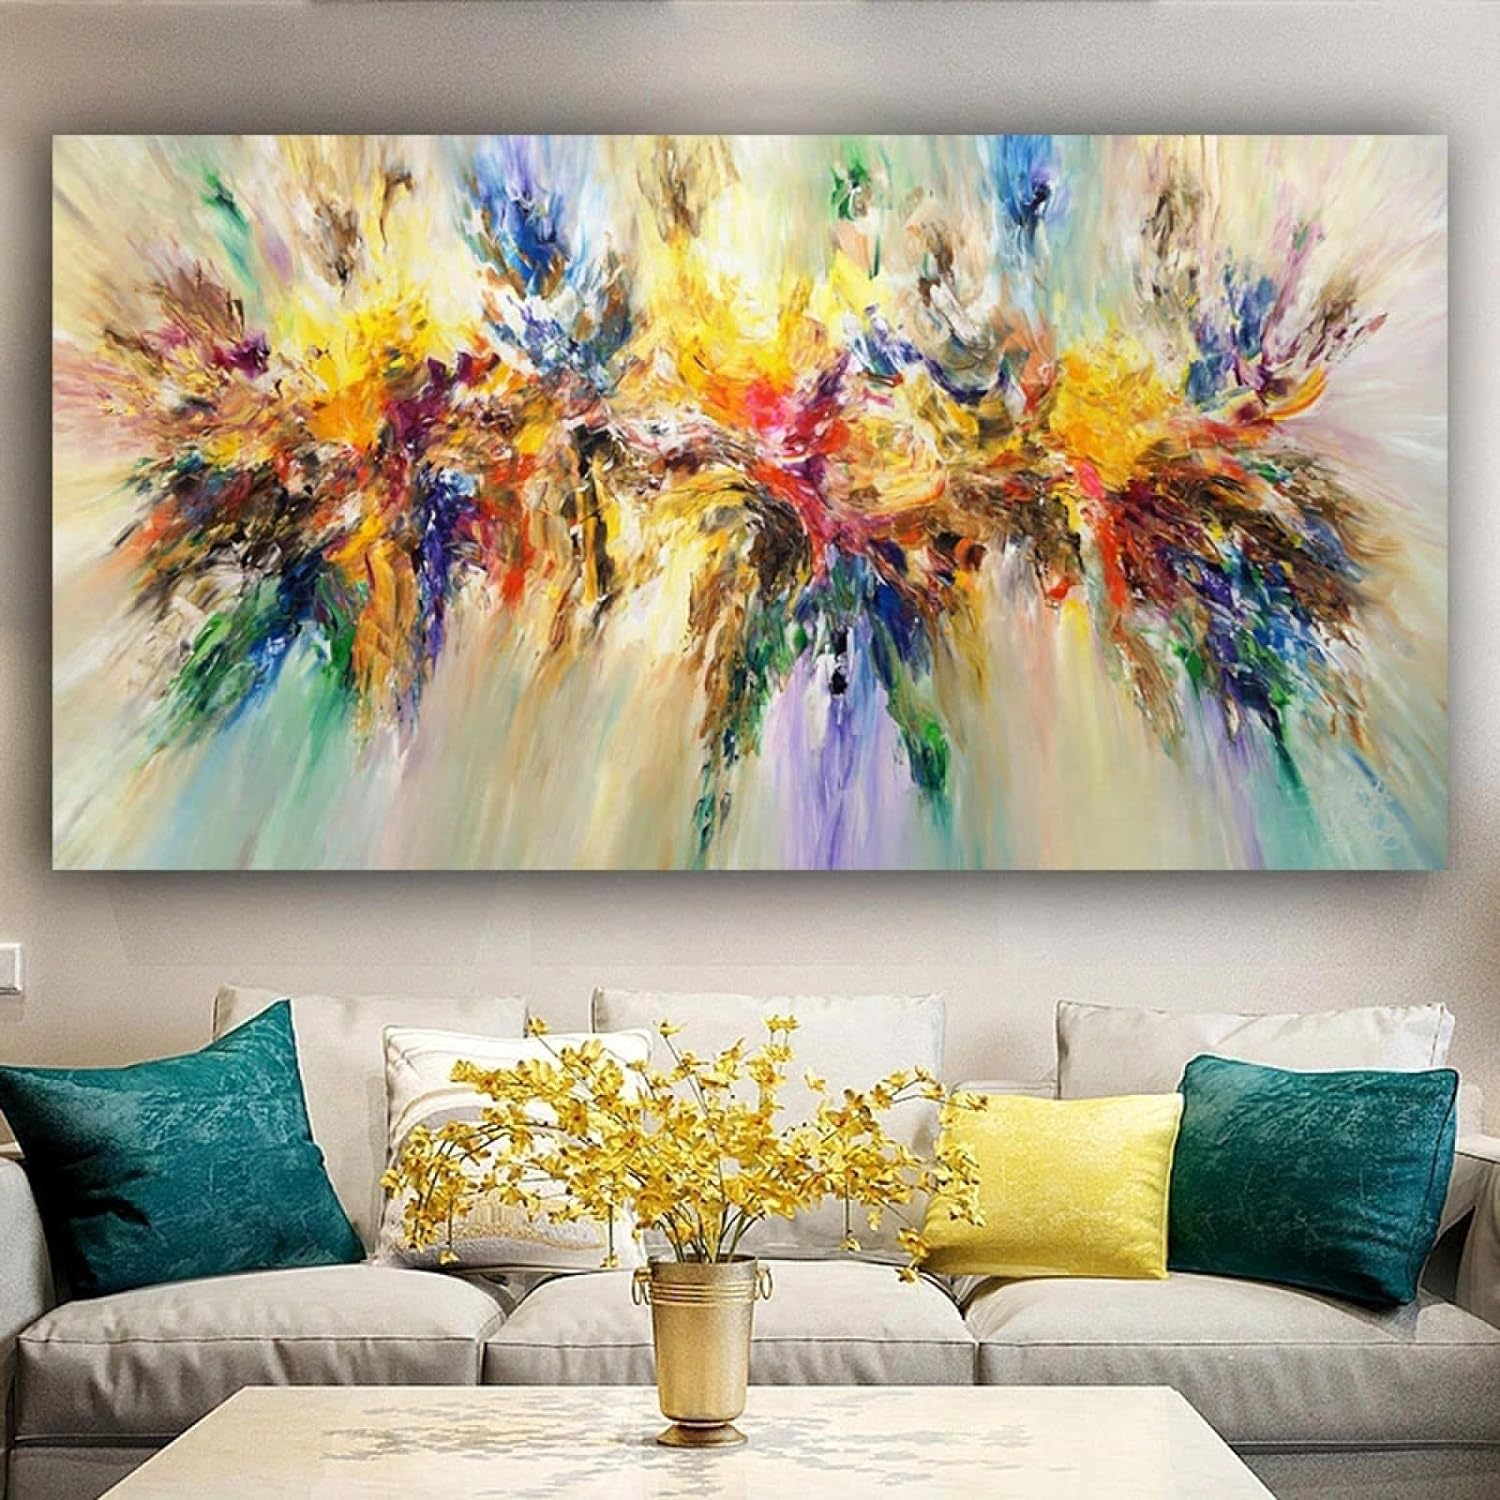 Energetic Abstract Expression: Colorful Splash